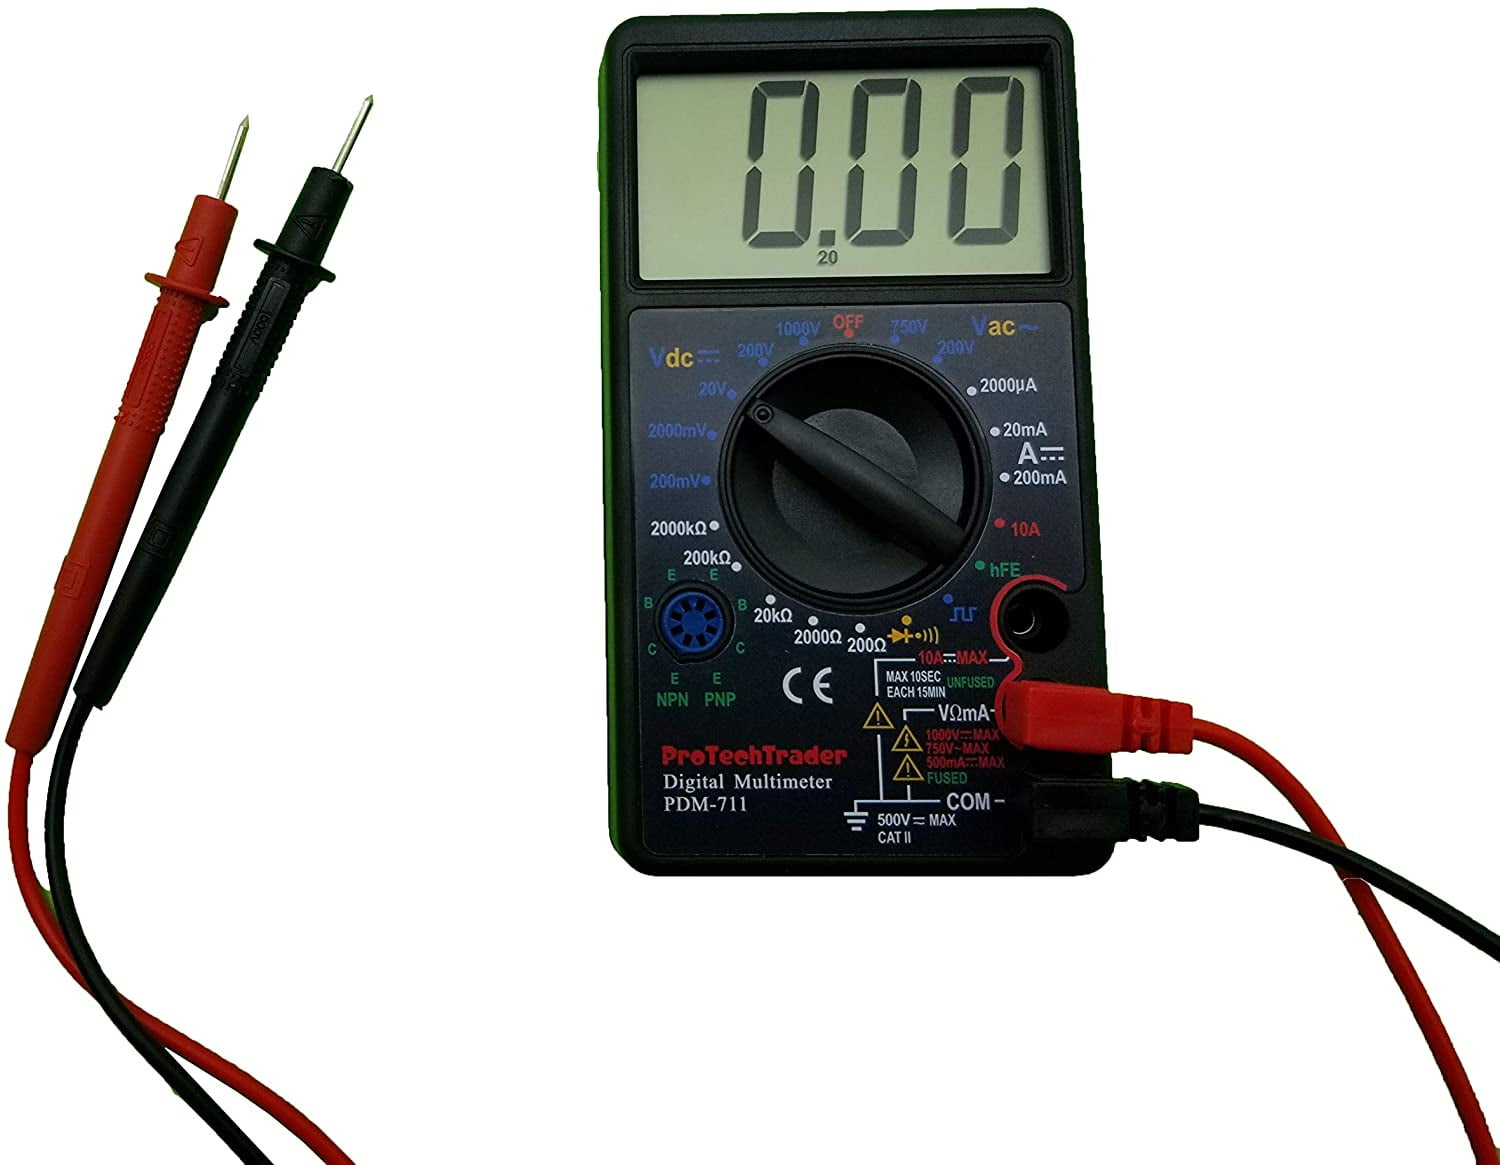 Basic Digital Multimeter with 7 Test Functions AC DC Voltage Resistance Current Transistor Diode Audible Continuity Buzzer and Square Wave Output Basic Digital Multimeter 